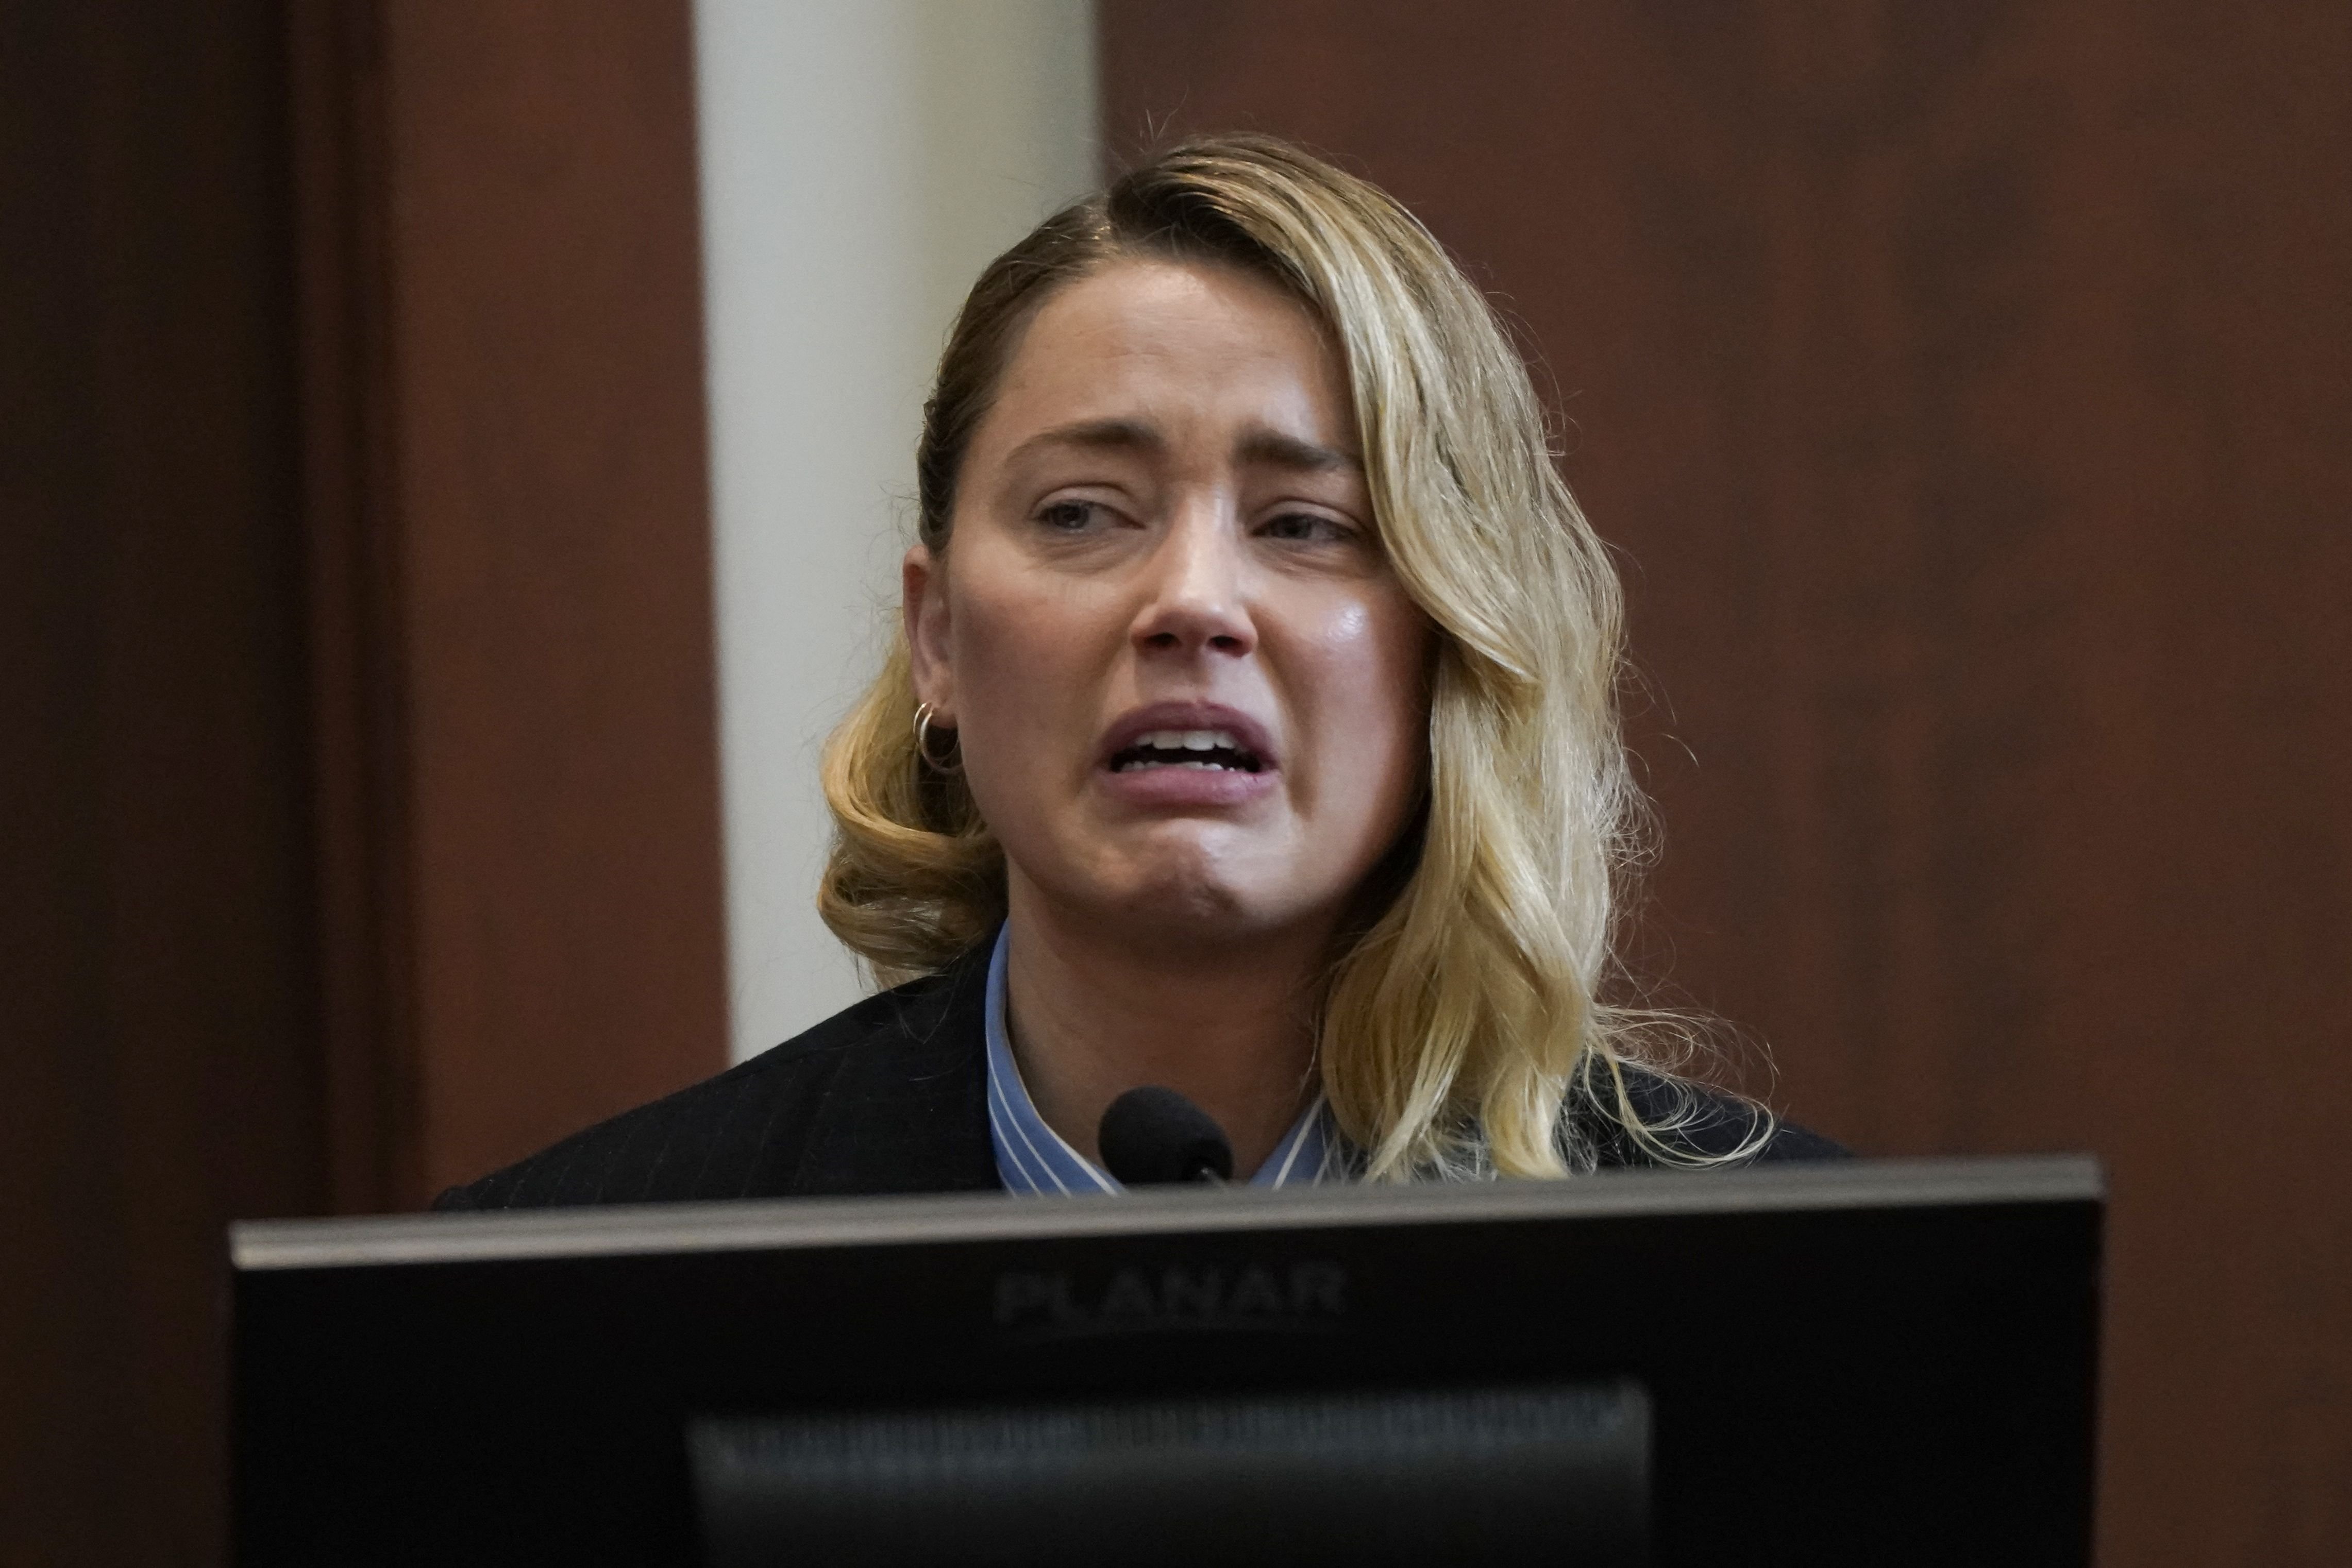 Amber Heard testifies against Johnny Depp at Fairfax County Circuit Court during a defamation case against her in Fairfax, Virginia, on May 4, 2022. | Source: Getty Images